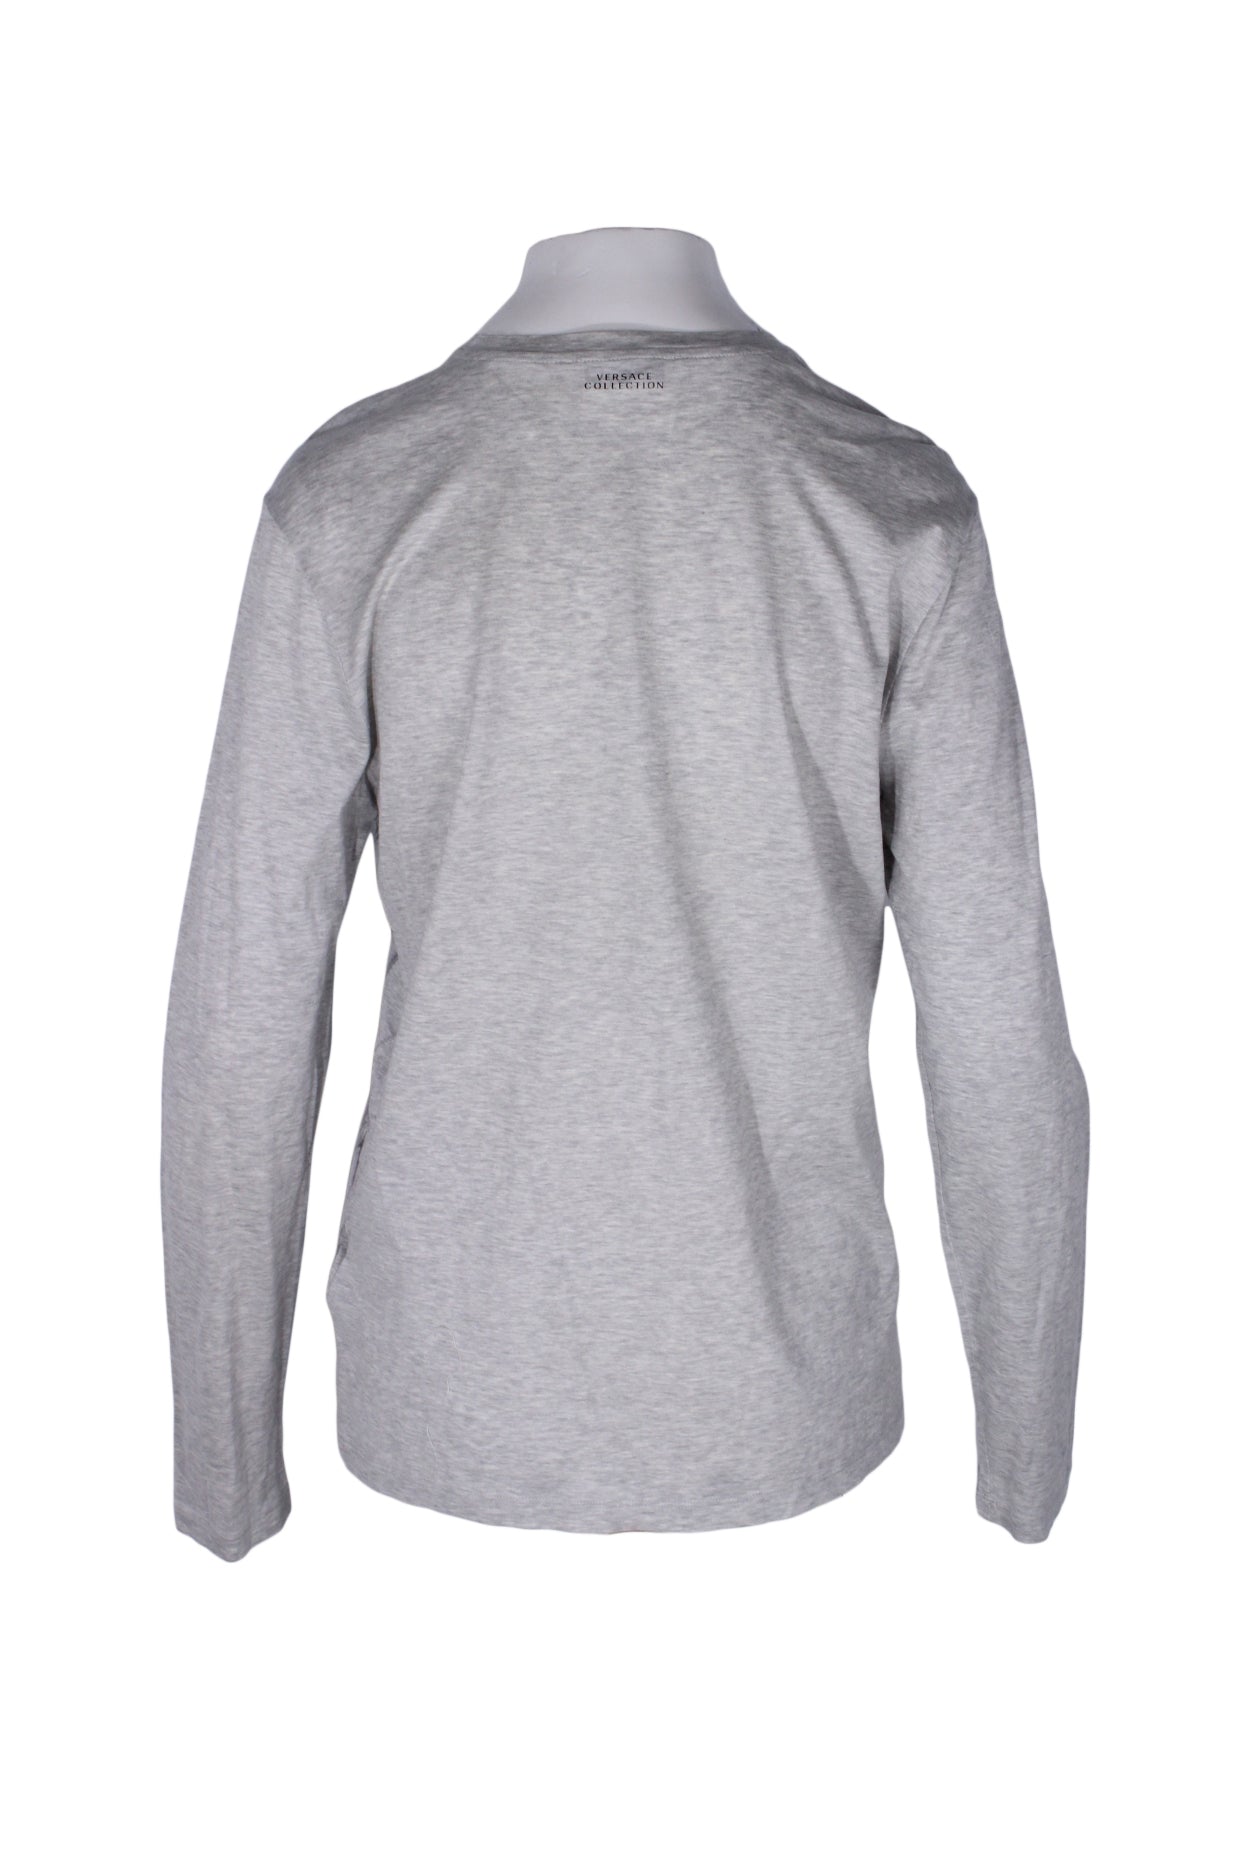 back angle versace collection light heather gray long sleeve t-shirt on feminine mannequin torso featuring 'versace collection' text at neckline.